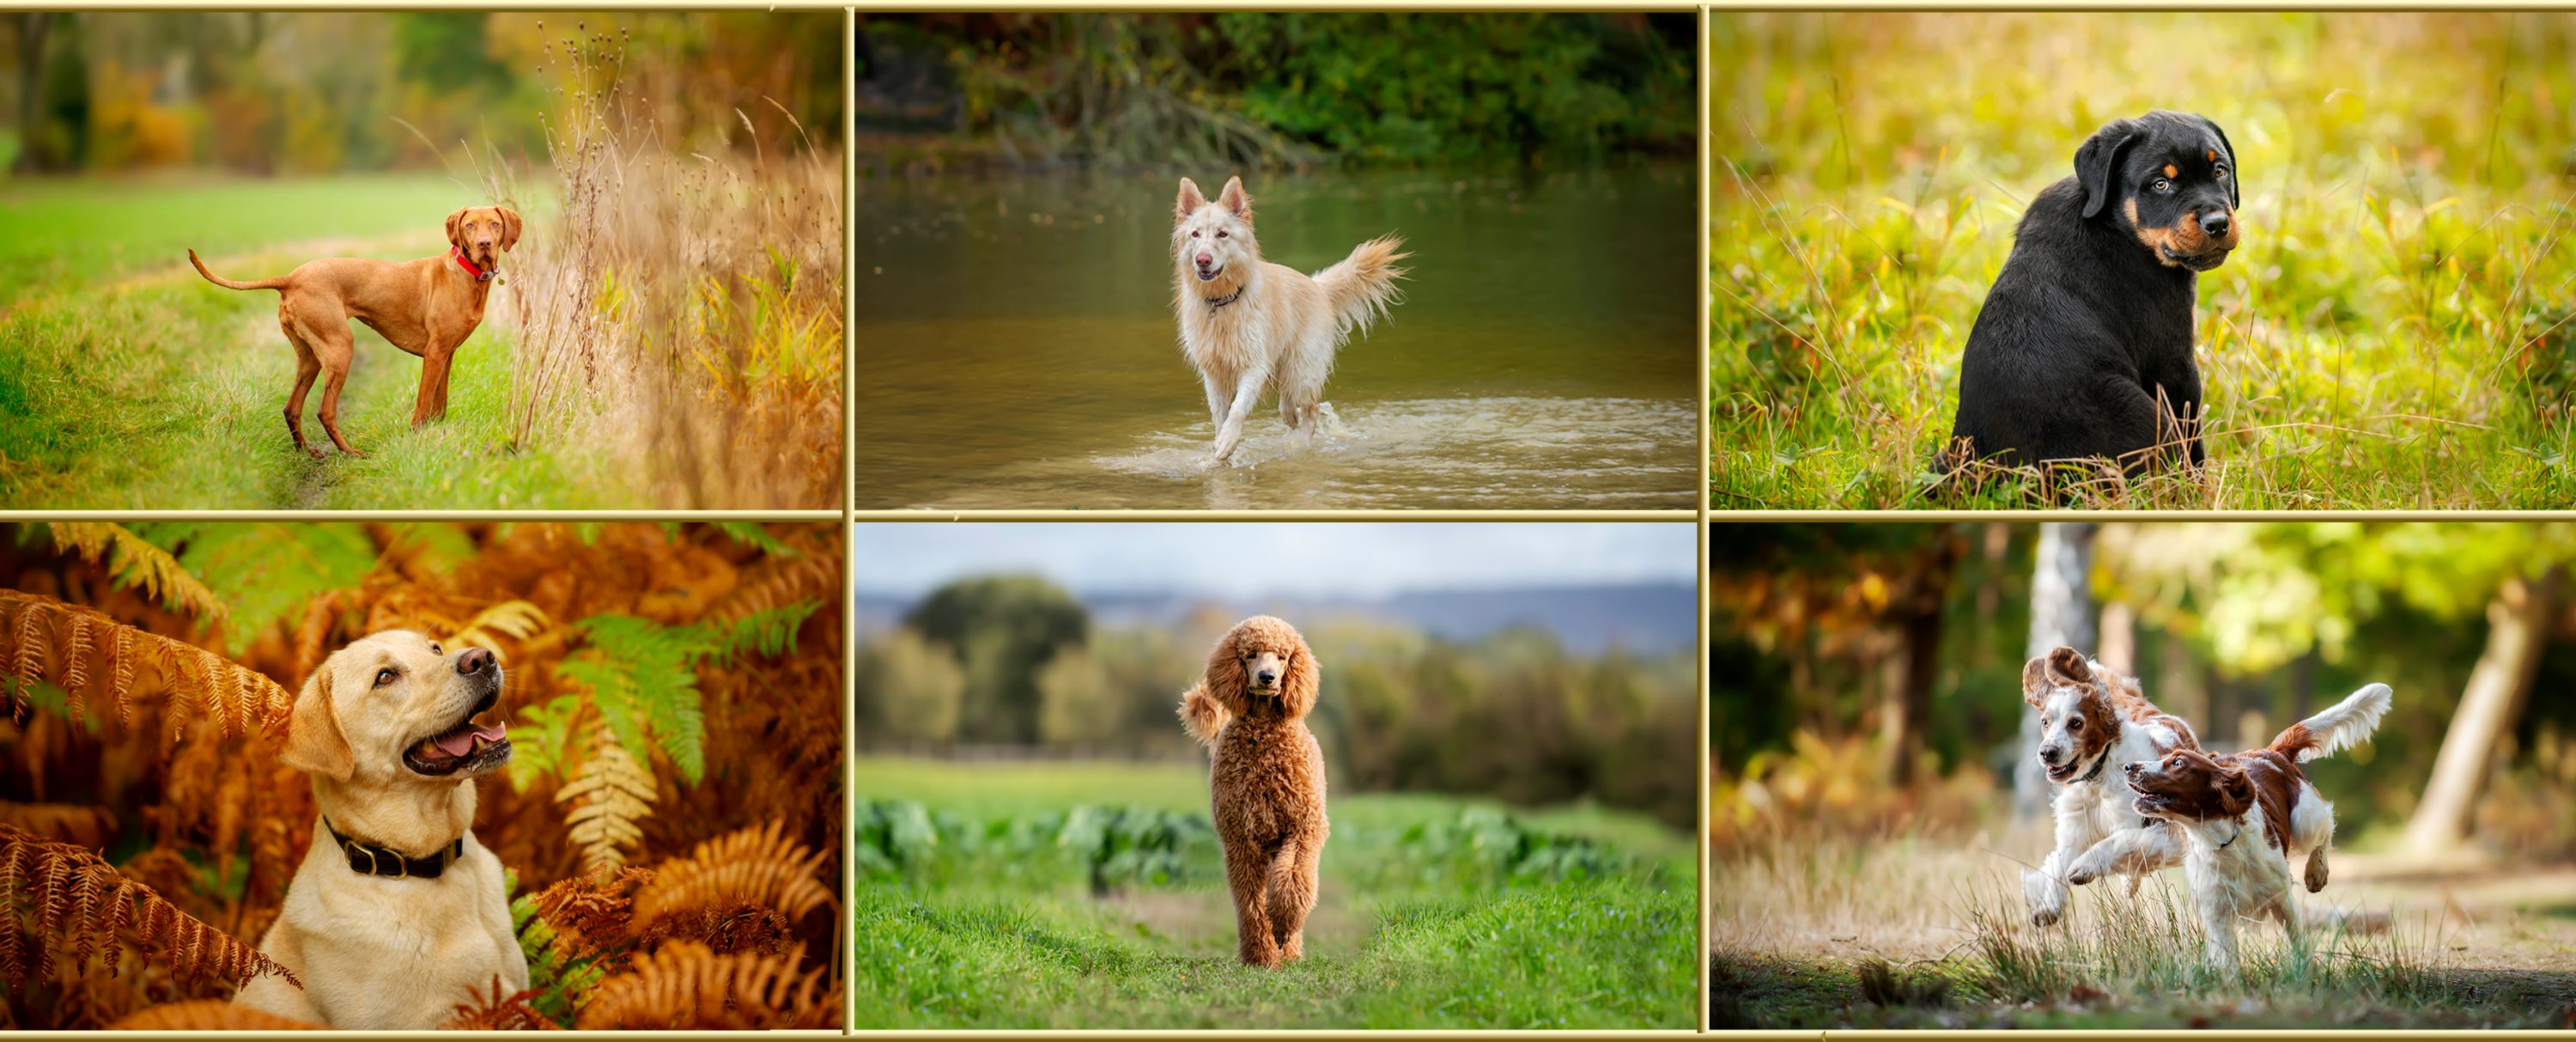 Dog Photography Event May 2021